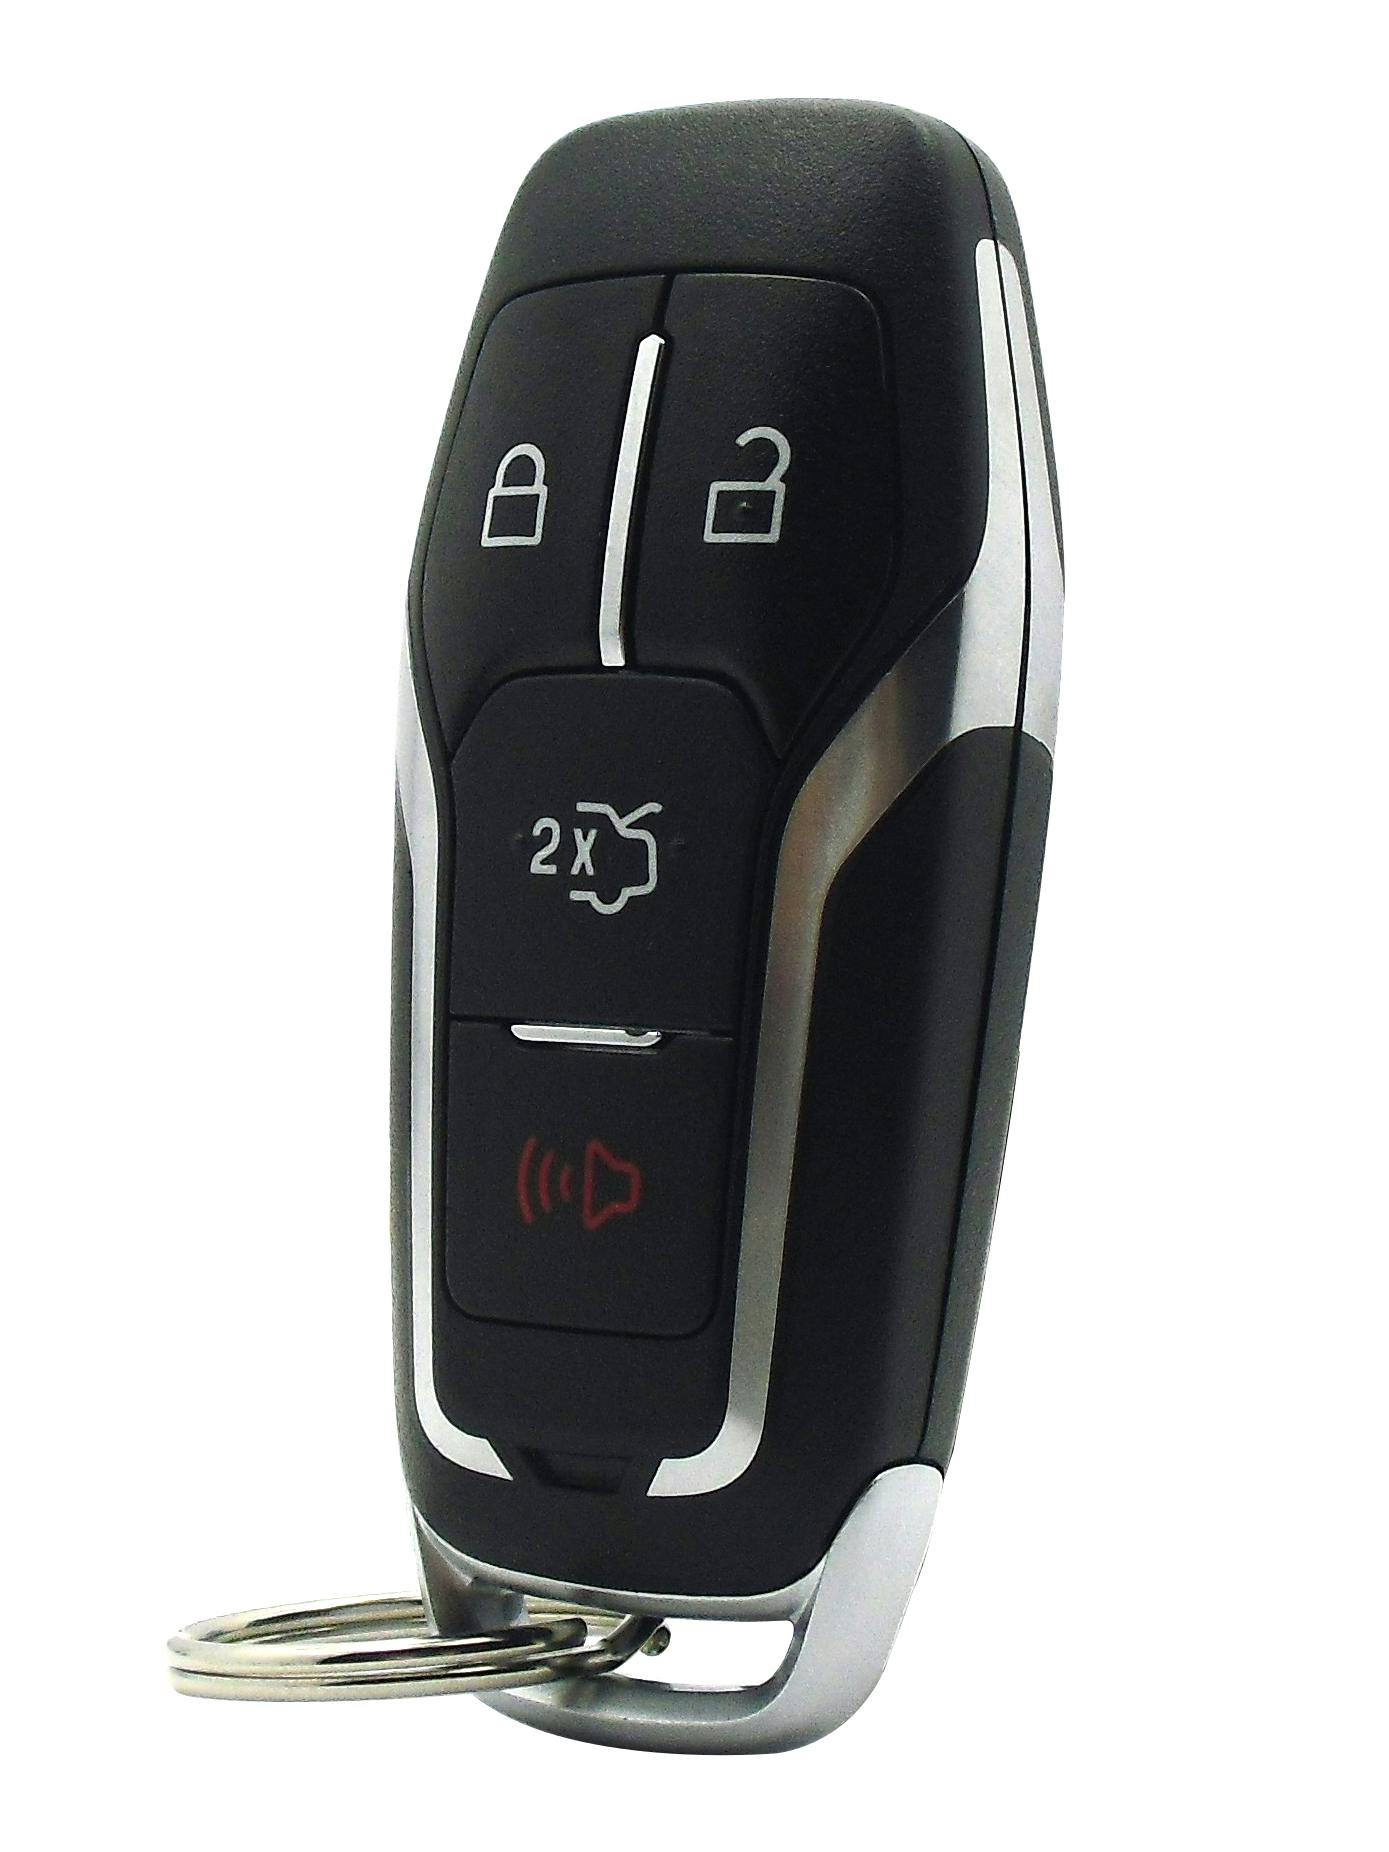 Ford Remote Entry Smart Key - 4 Button